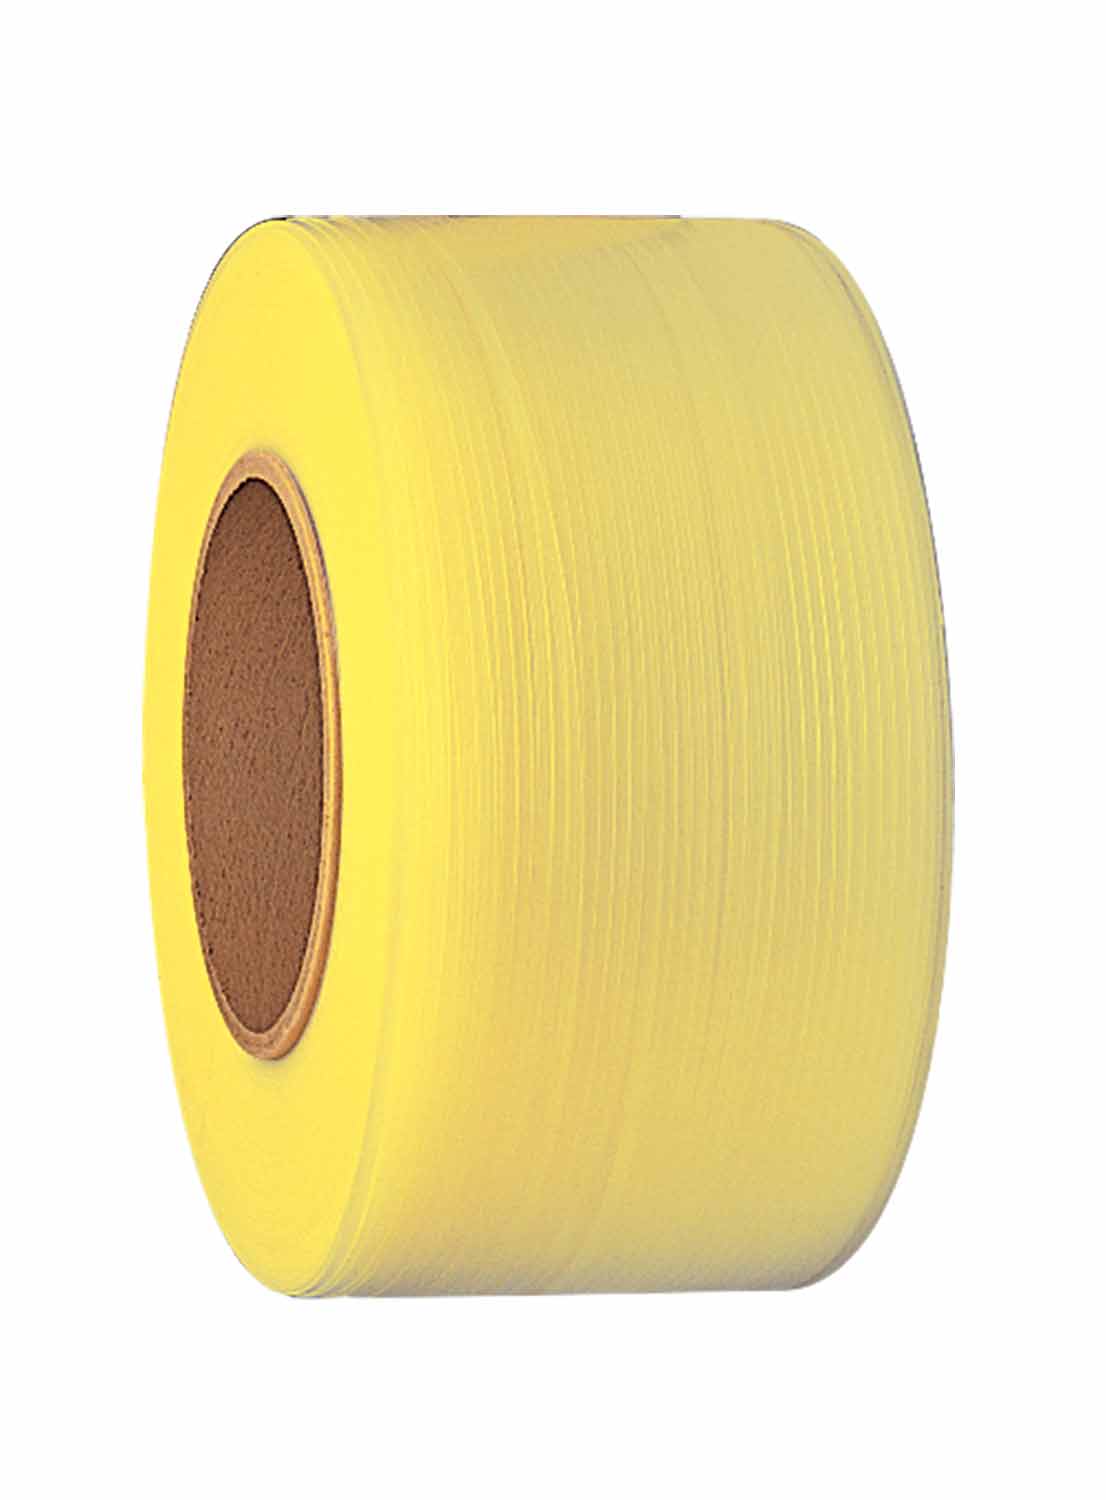 PLASTIC STRAPPING YELLOW
3/16&quot; (5mm) 100 LB. 8X8
POLYPROPYLENE SIGNODE CONTRAX